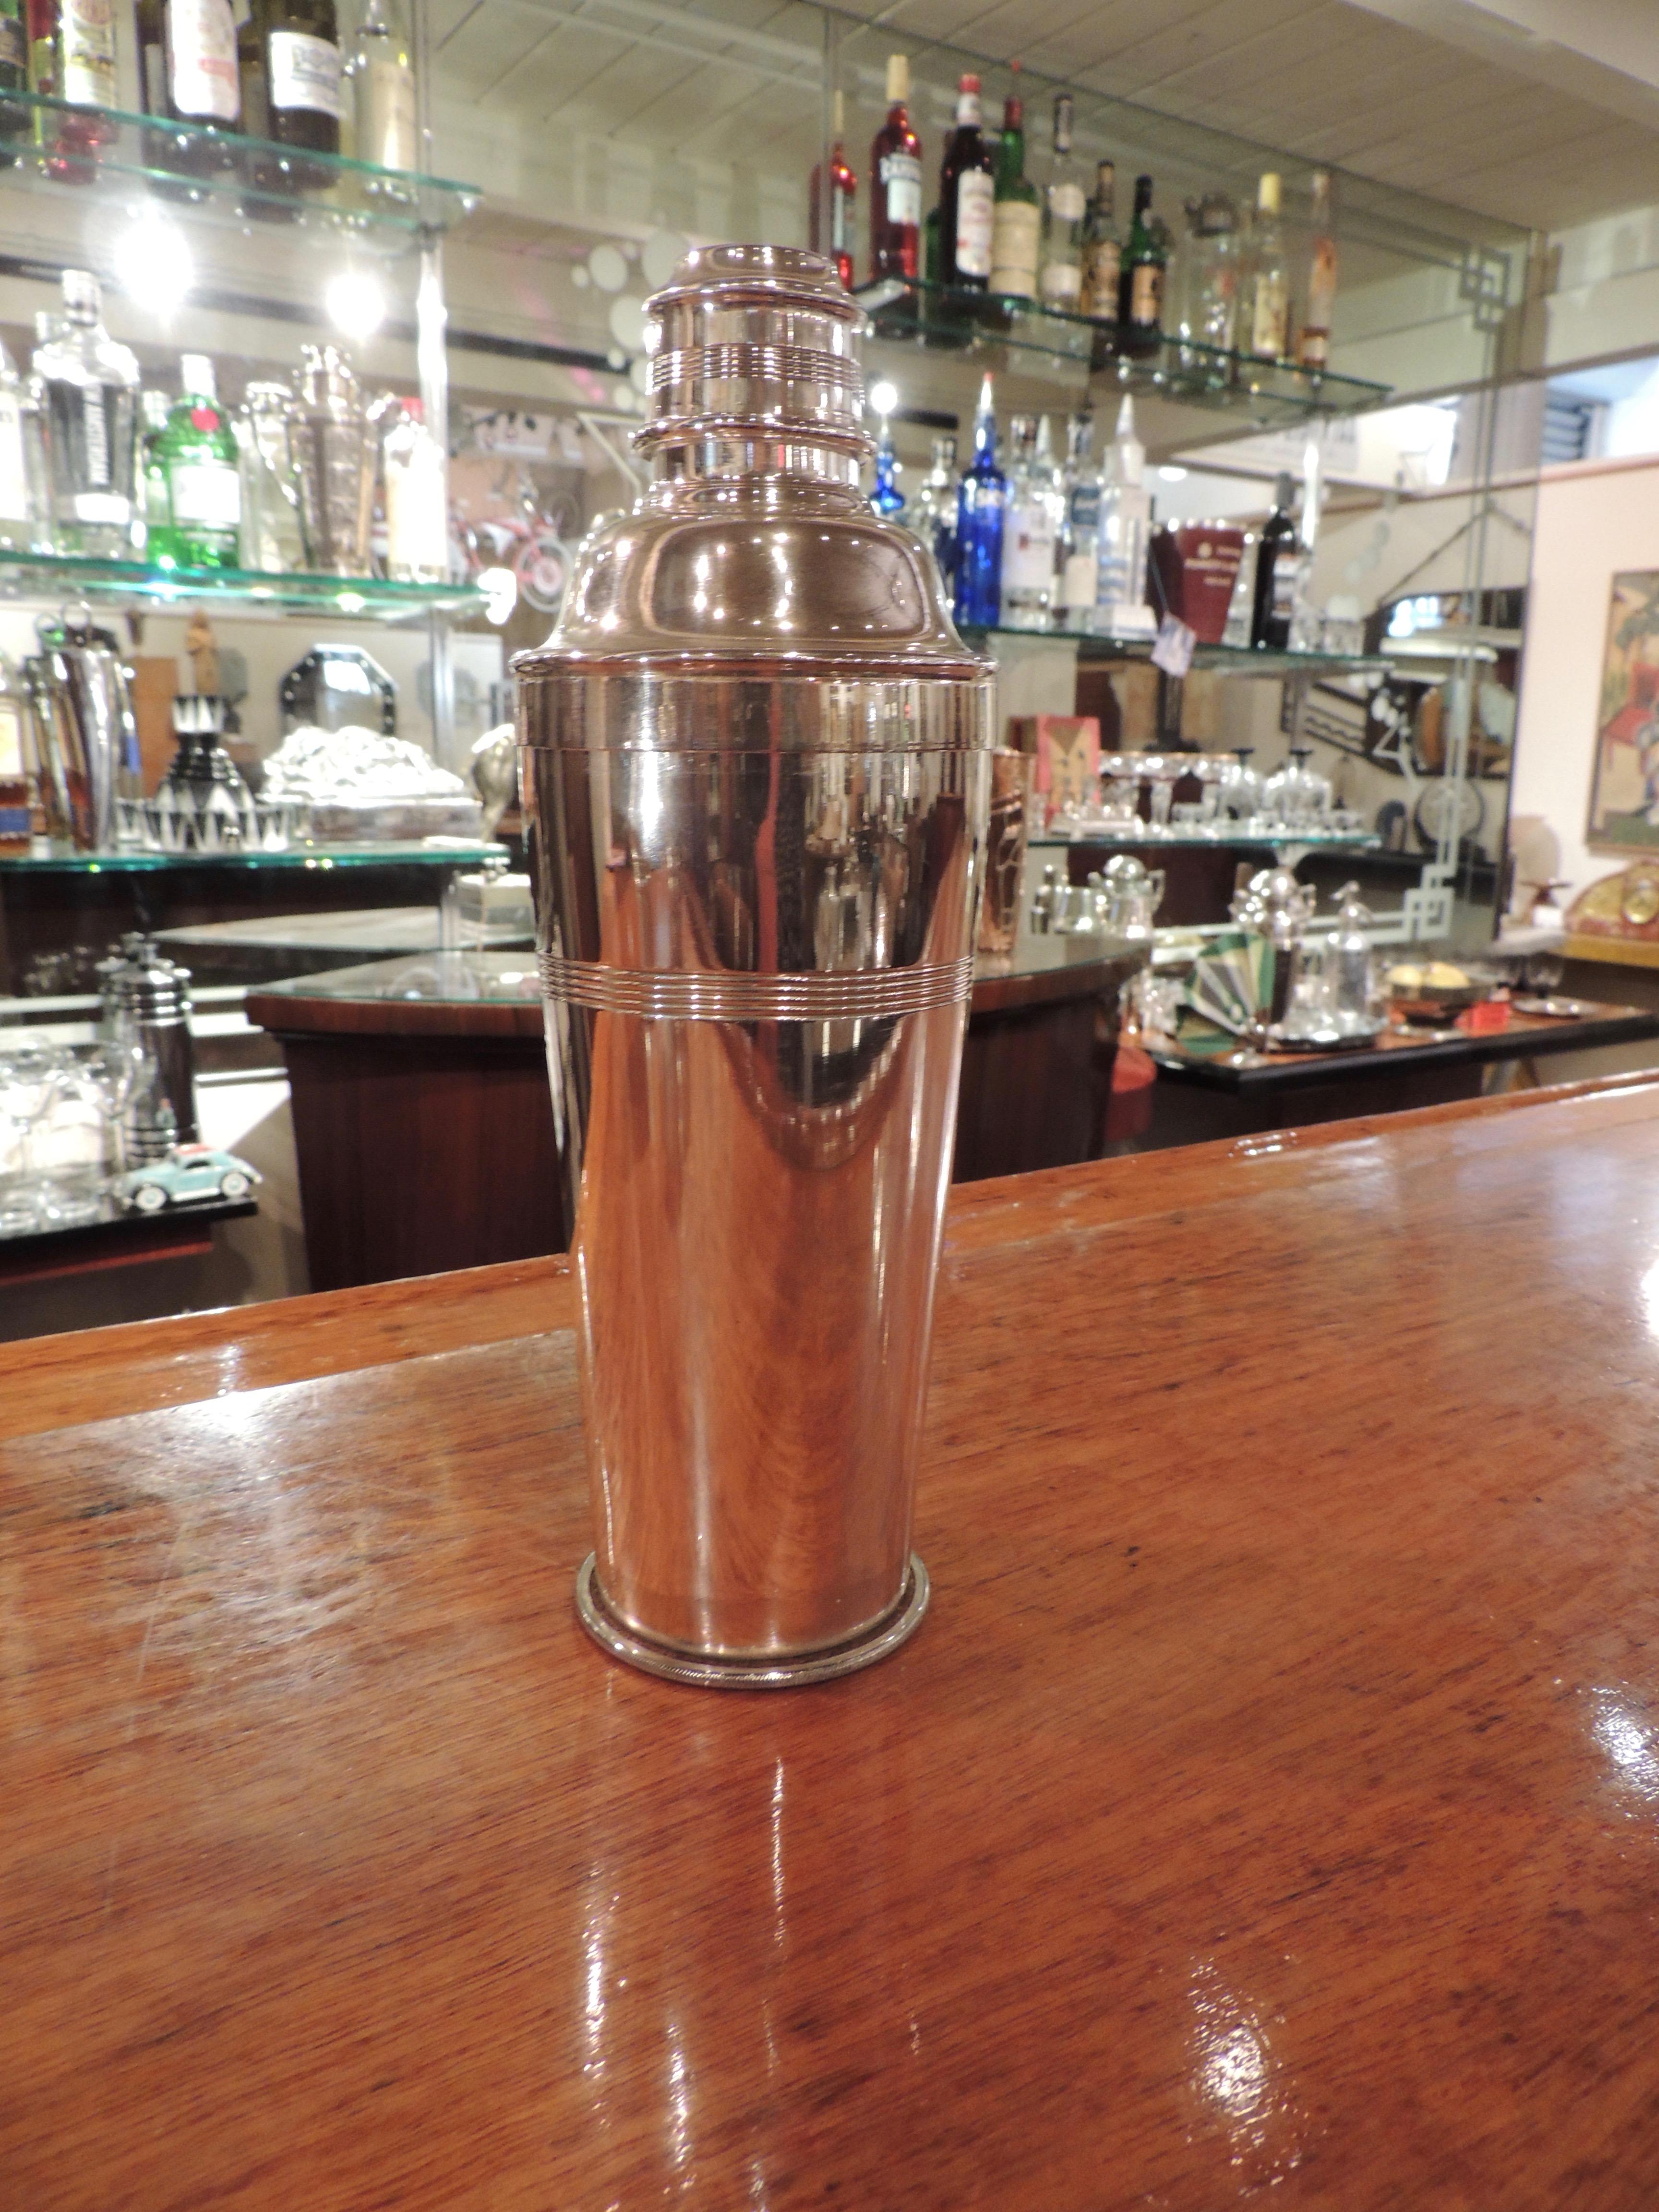 The silver plated ”Igene” Cocktail Shaker is an ingenious invention that has a built in compartment that holds ice inside the shaker. Created by Farrow and Jackson, mechanical engineers that began producing equipment used in the production and sales